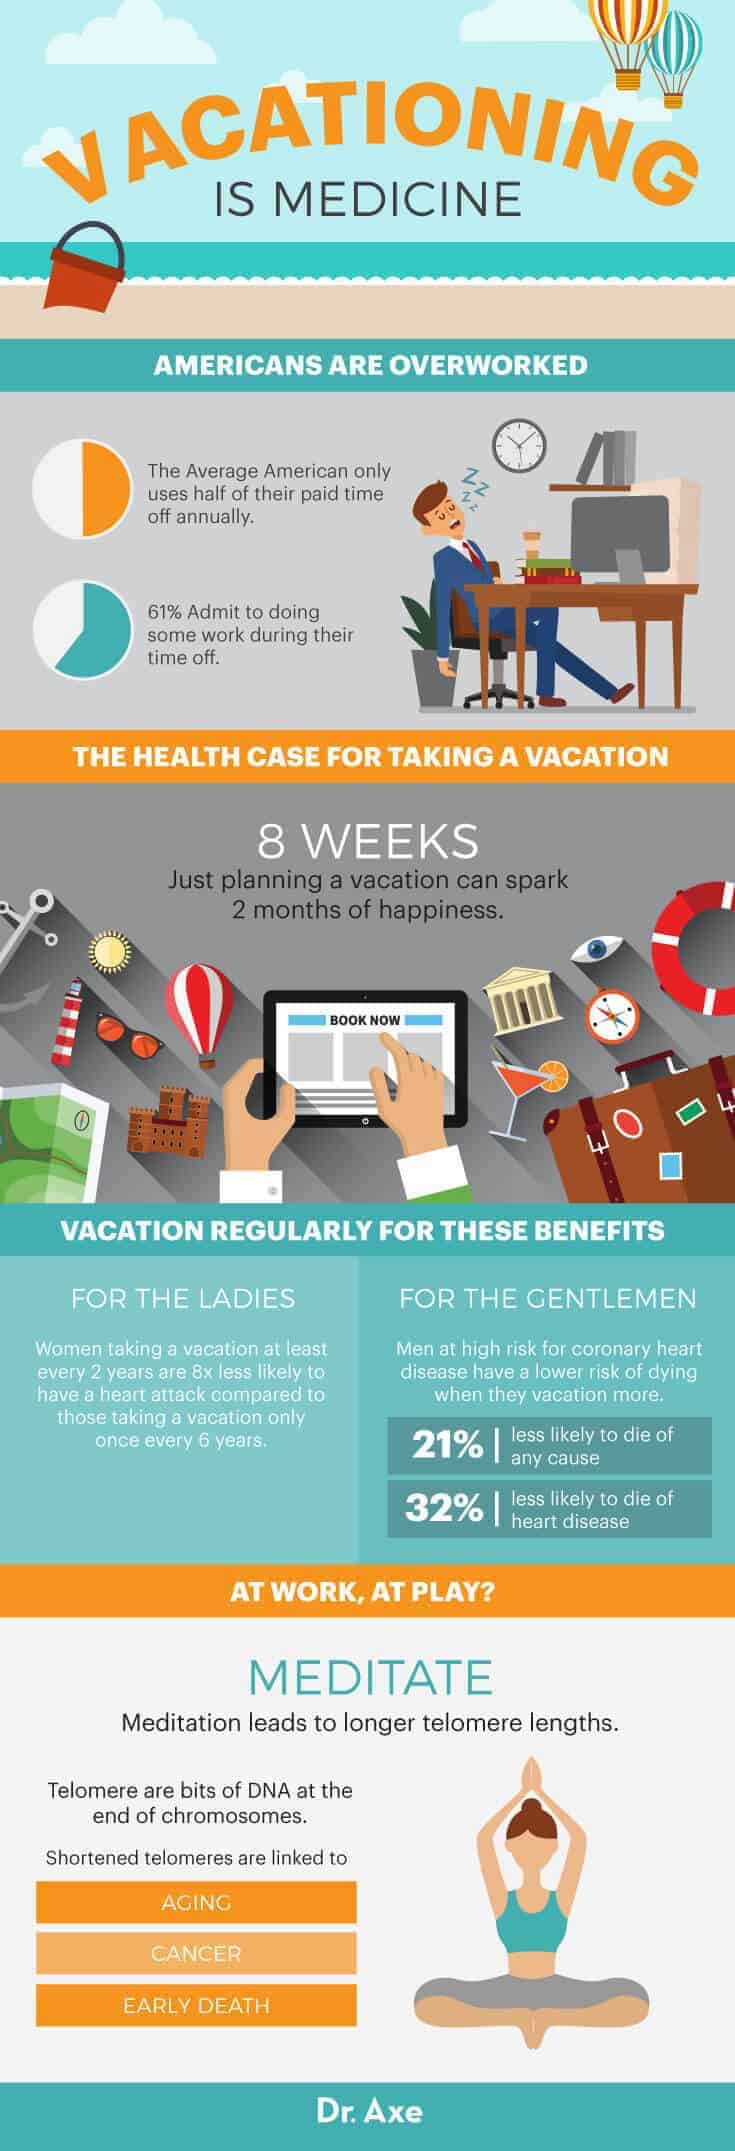 Vacation health benefits - Dr. Axe